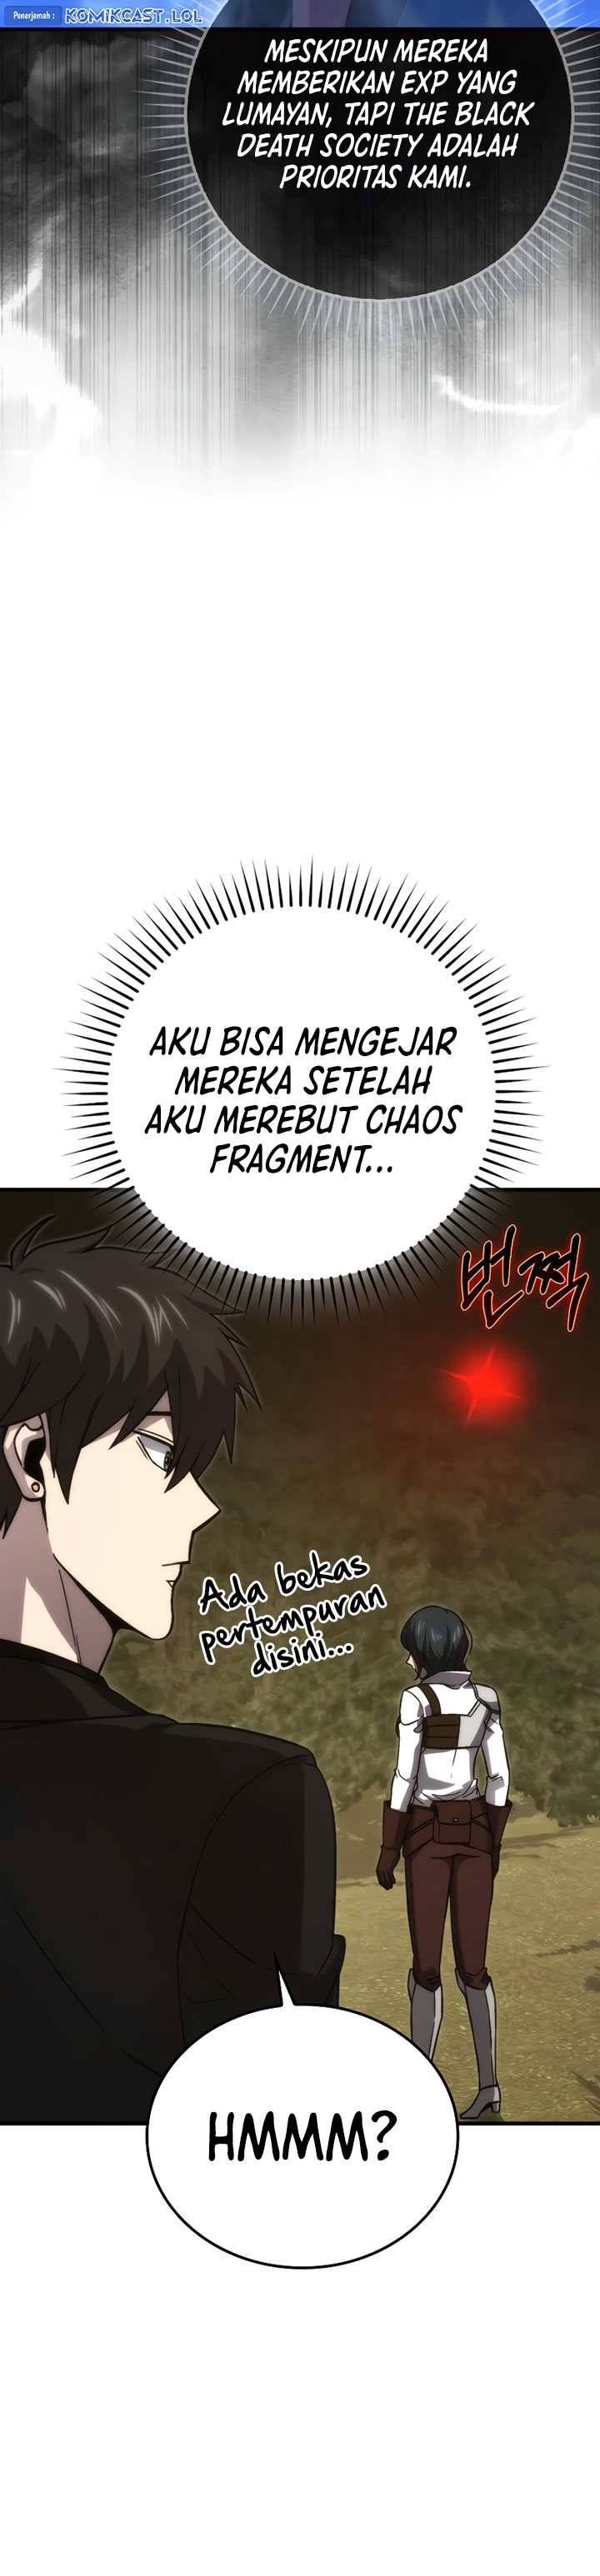 Demon Lord’s Martial Arts Ascension Chapter 68